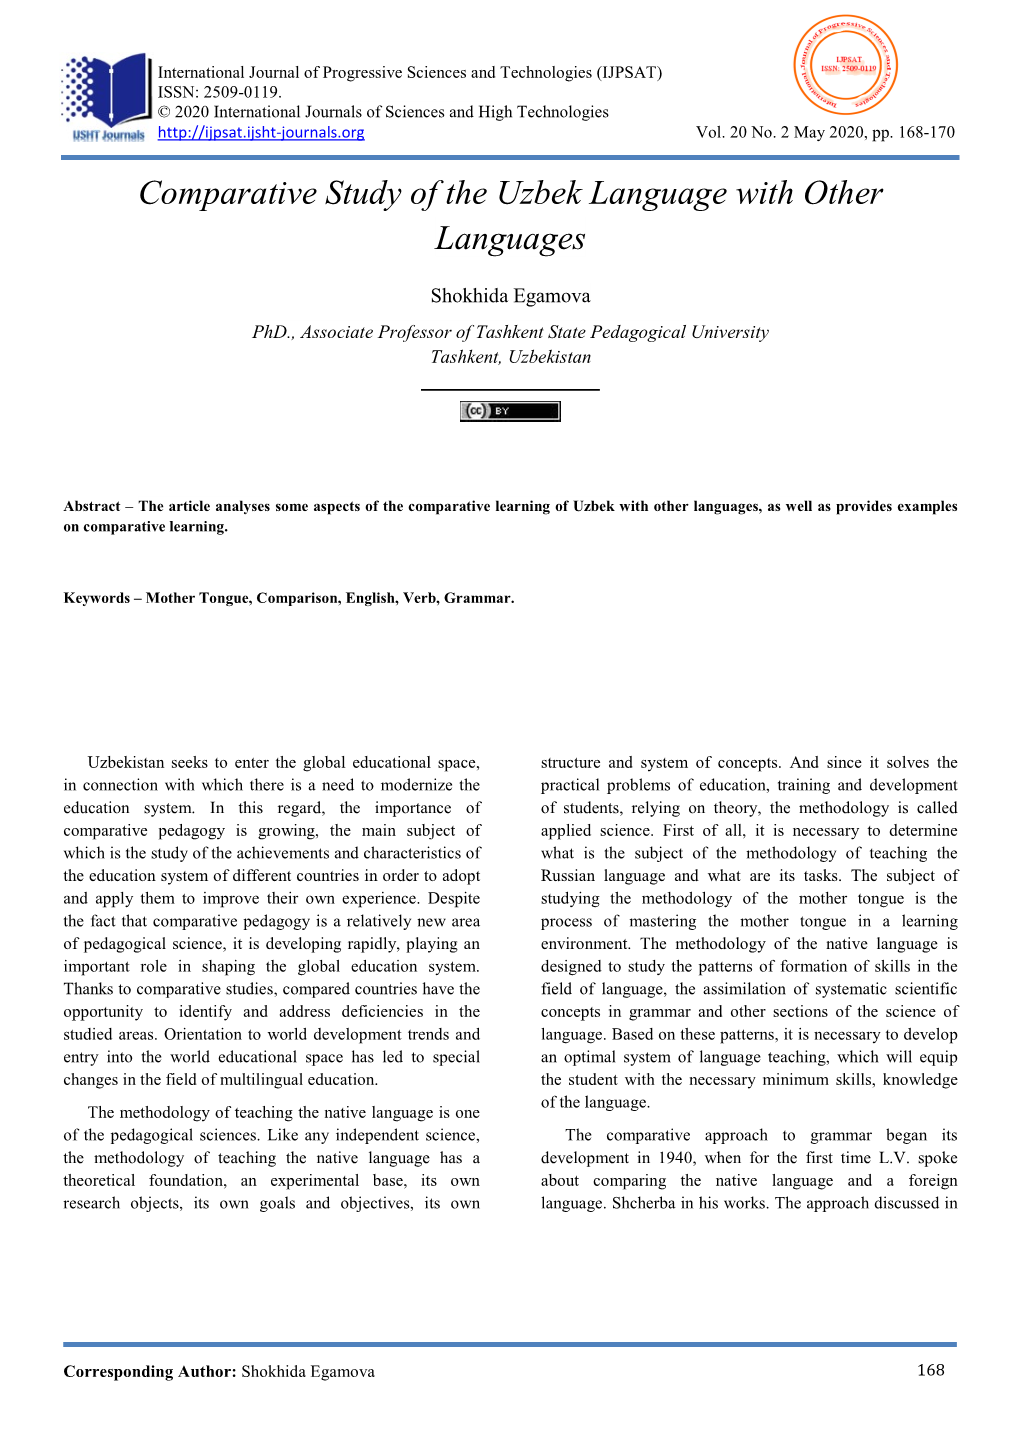 Comparative Study of the Uzbek Language with Other Languages